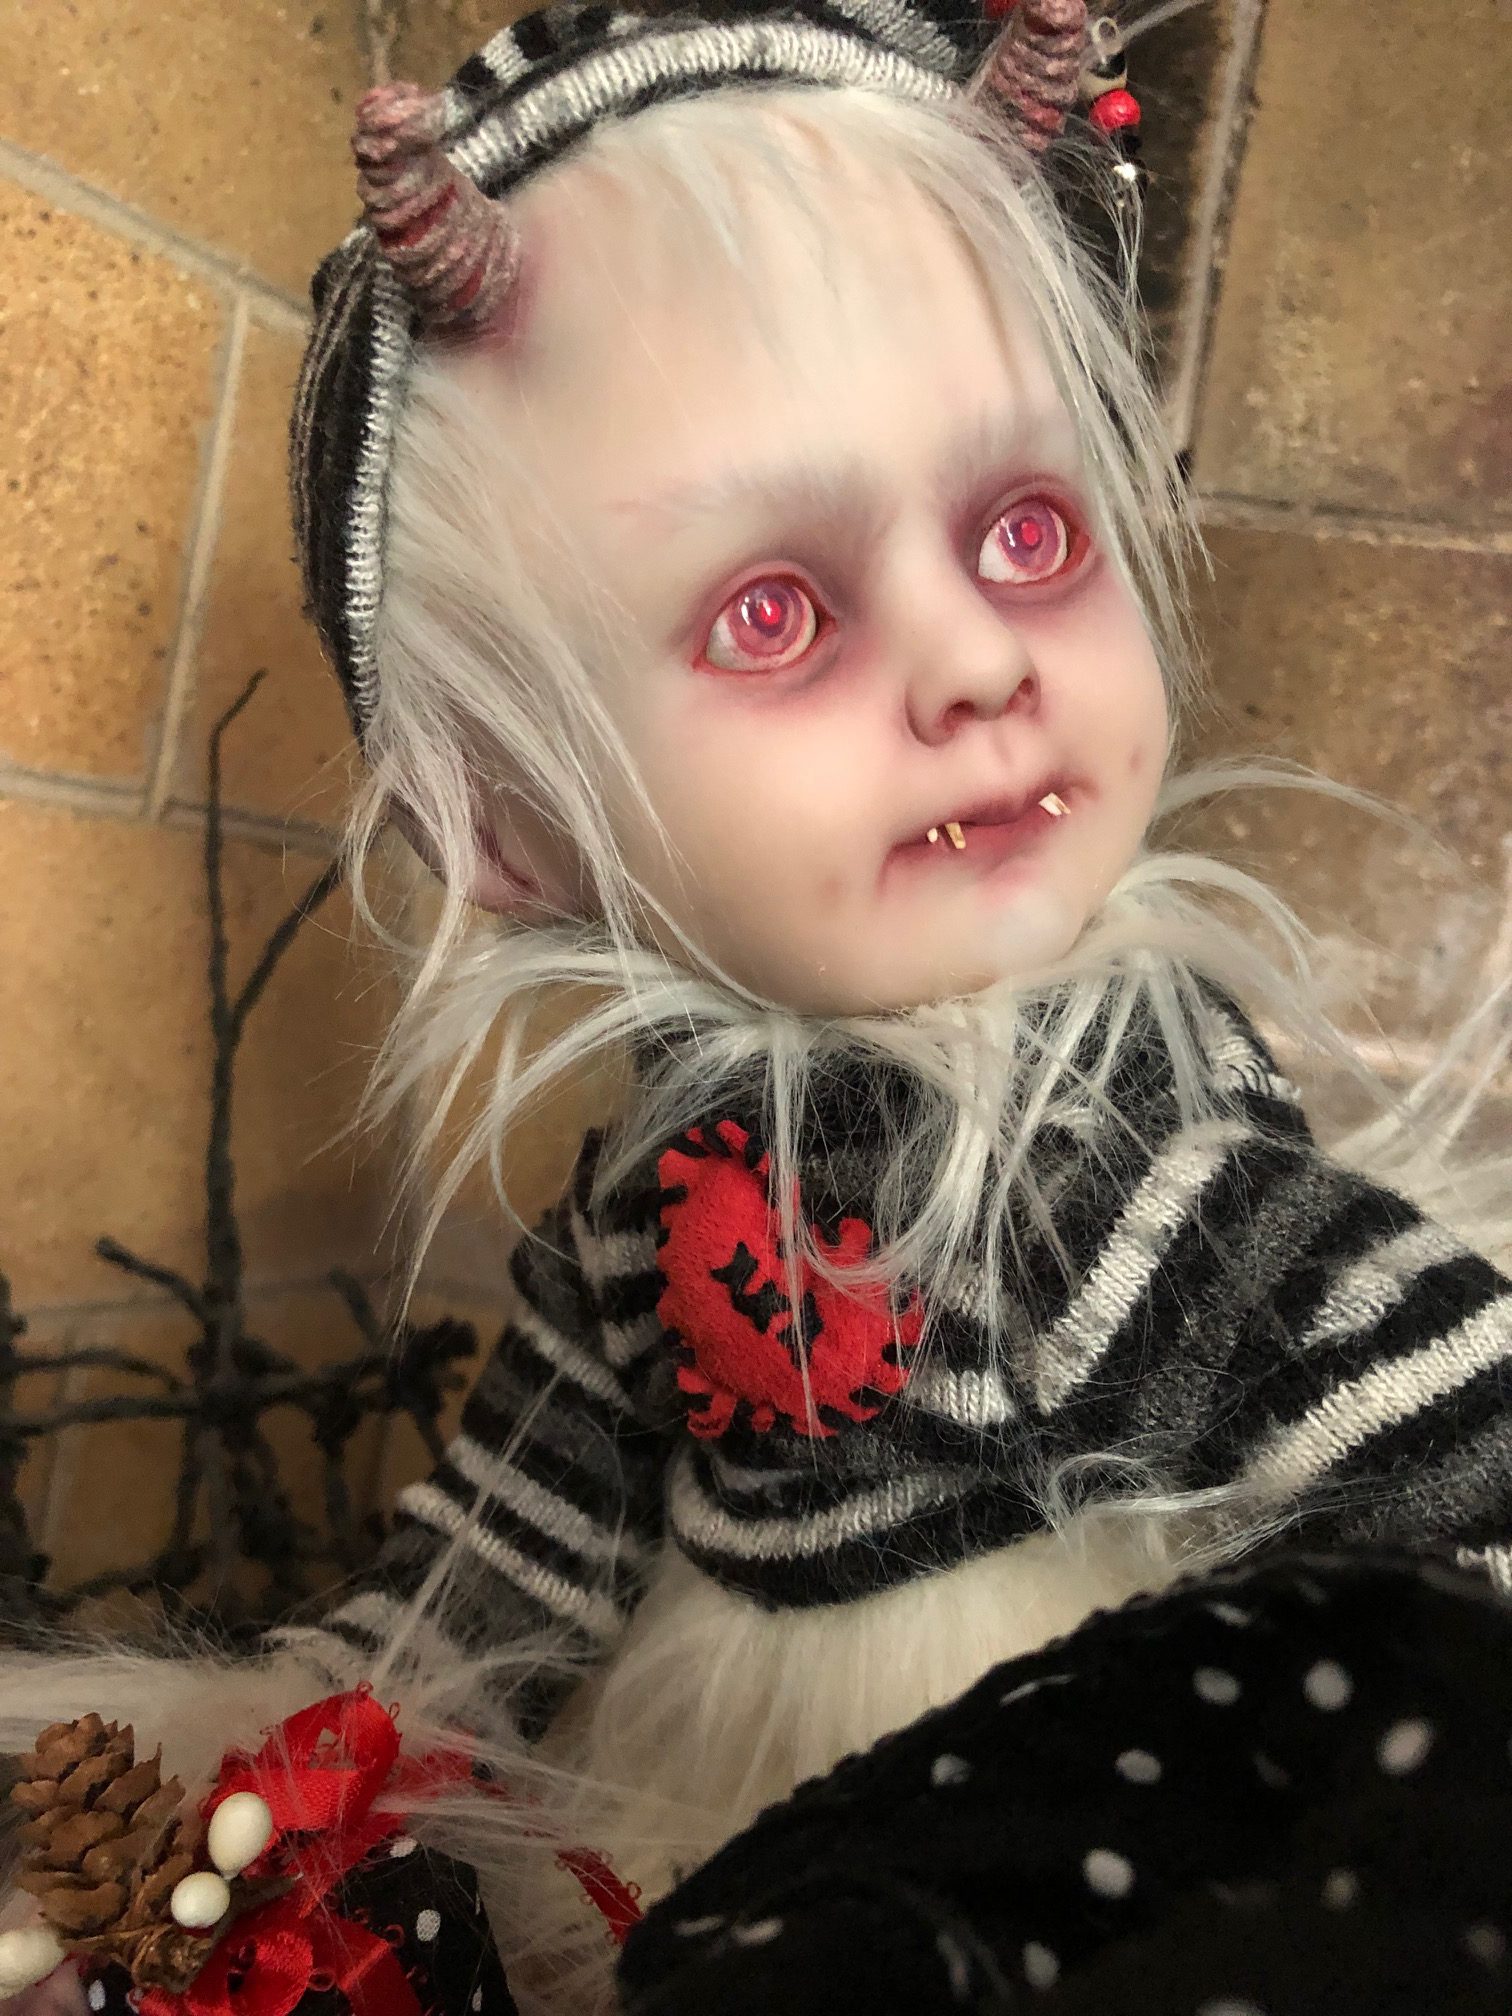 creepy baby holiday elf doll with red eyes, white hair and fur dressed in gray, black and white stripes with horns